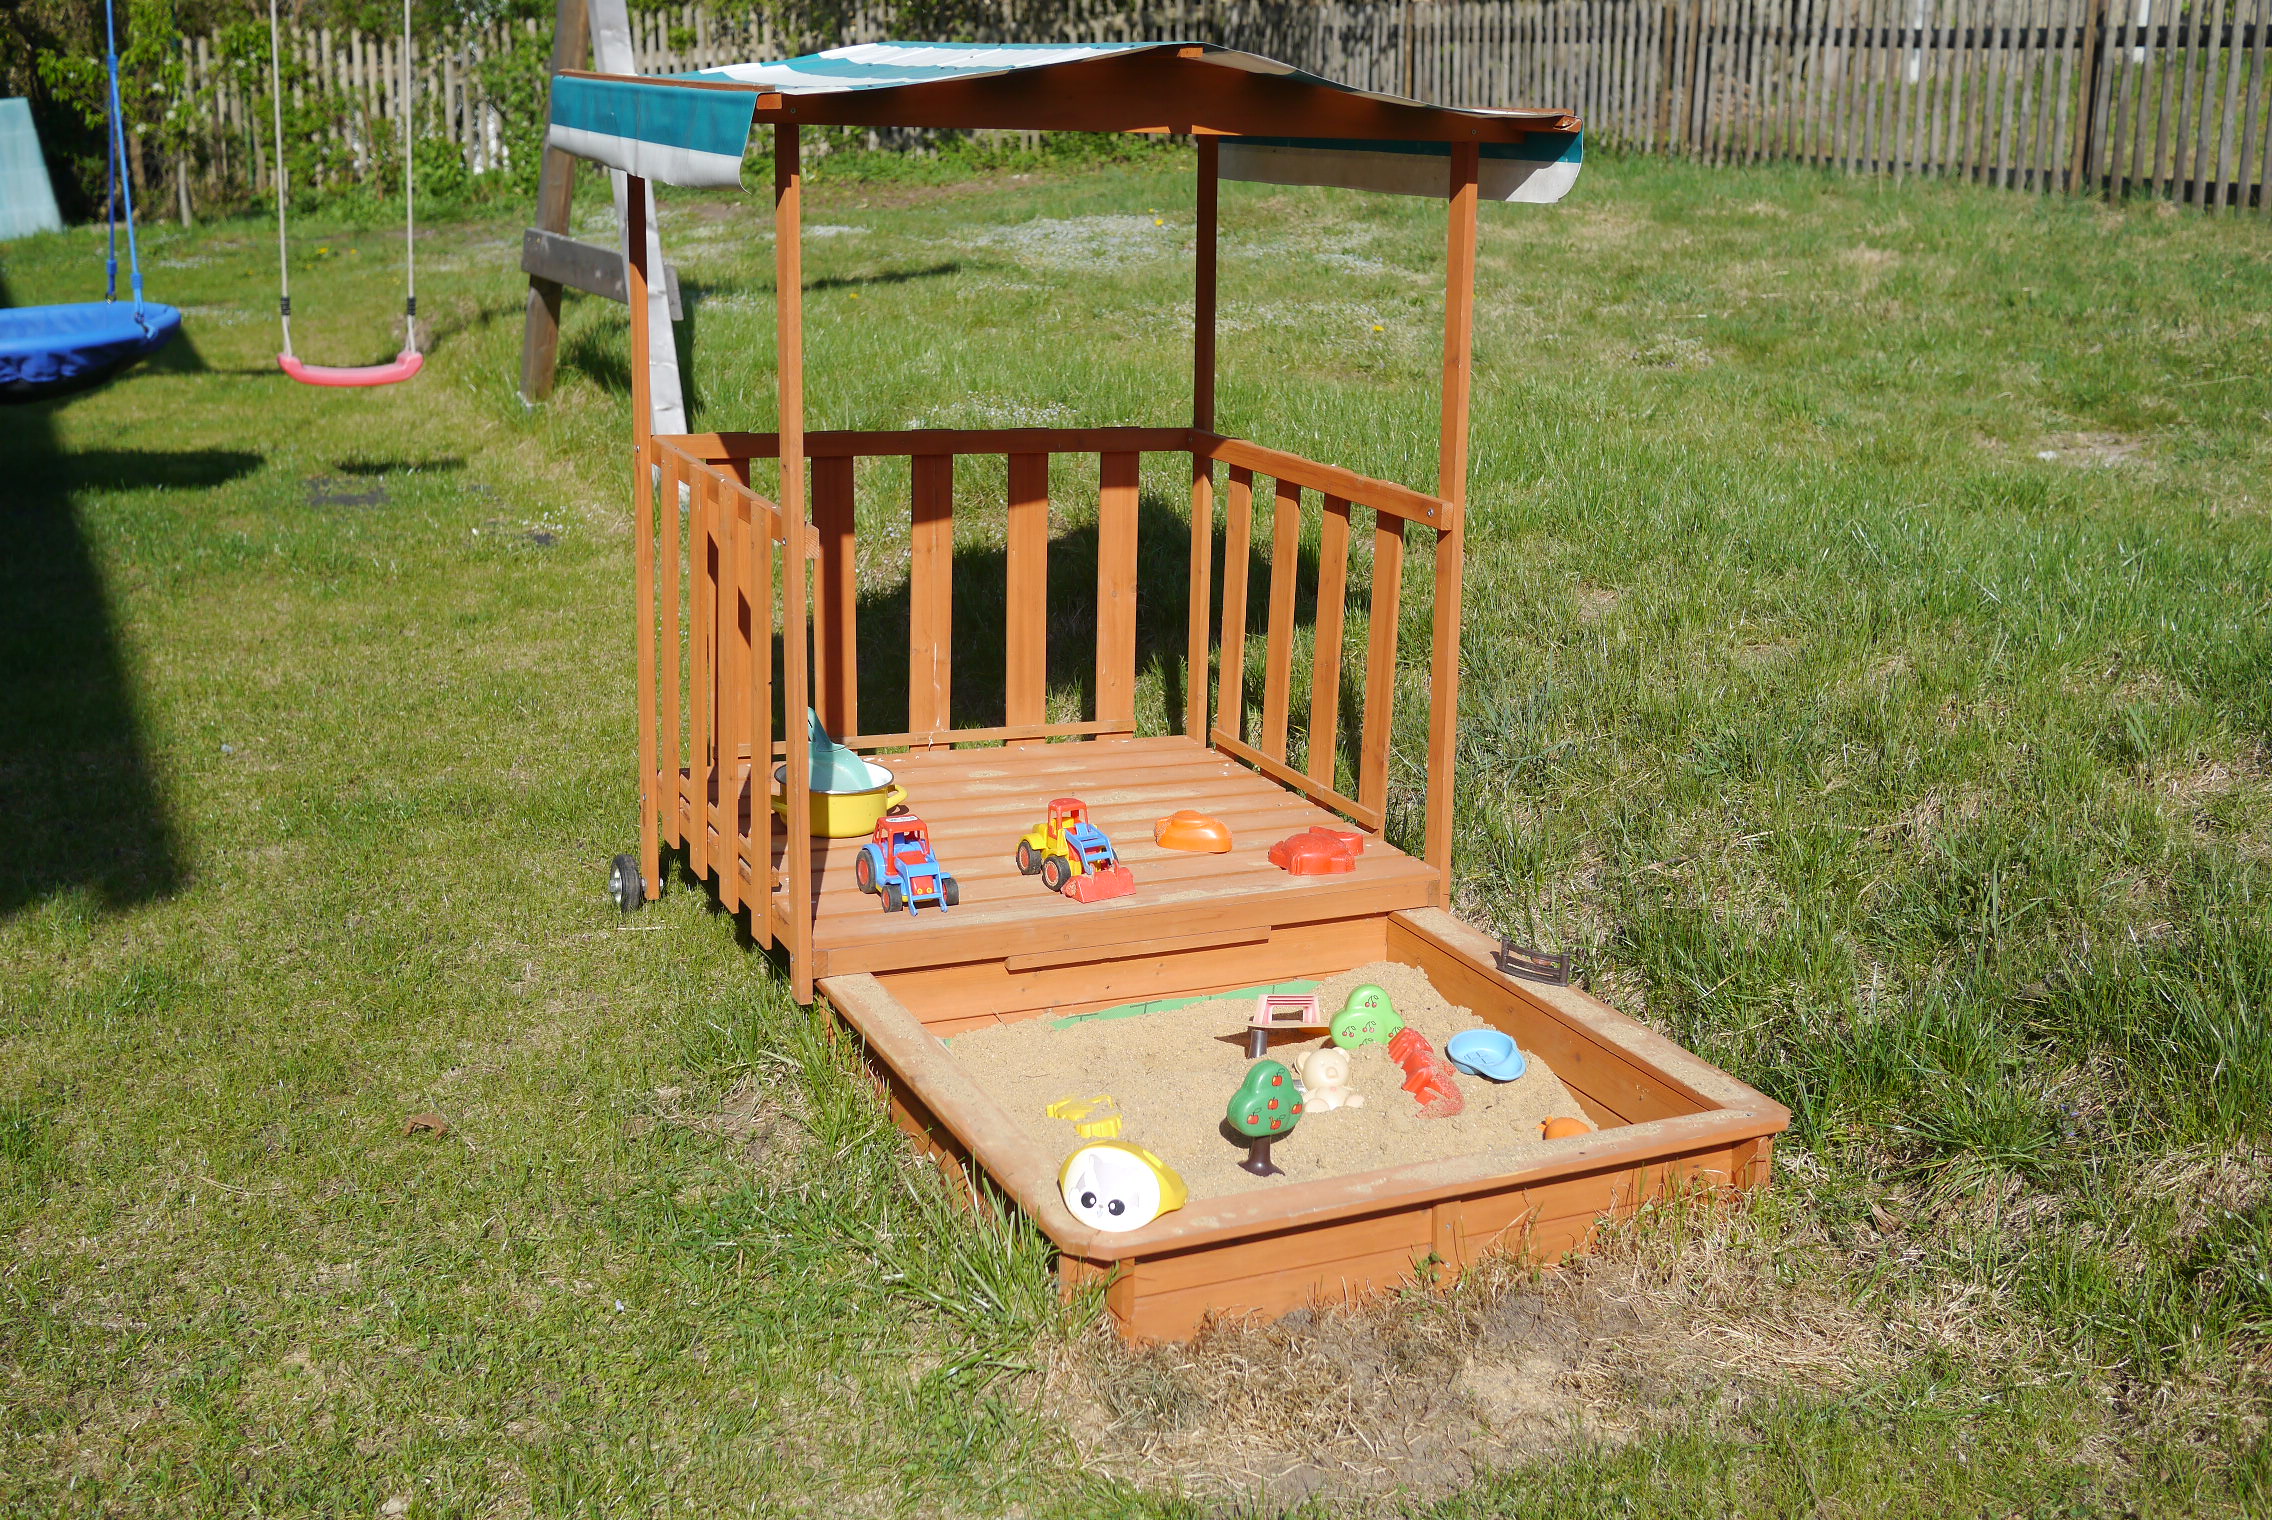 Our sandbox for the little ones.